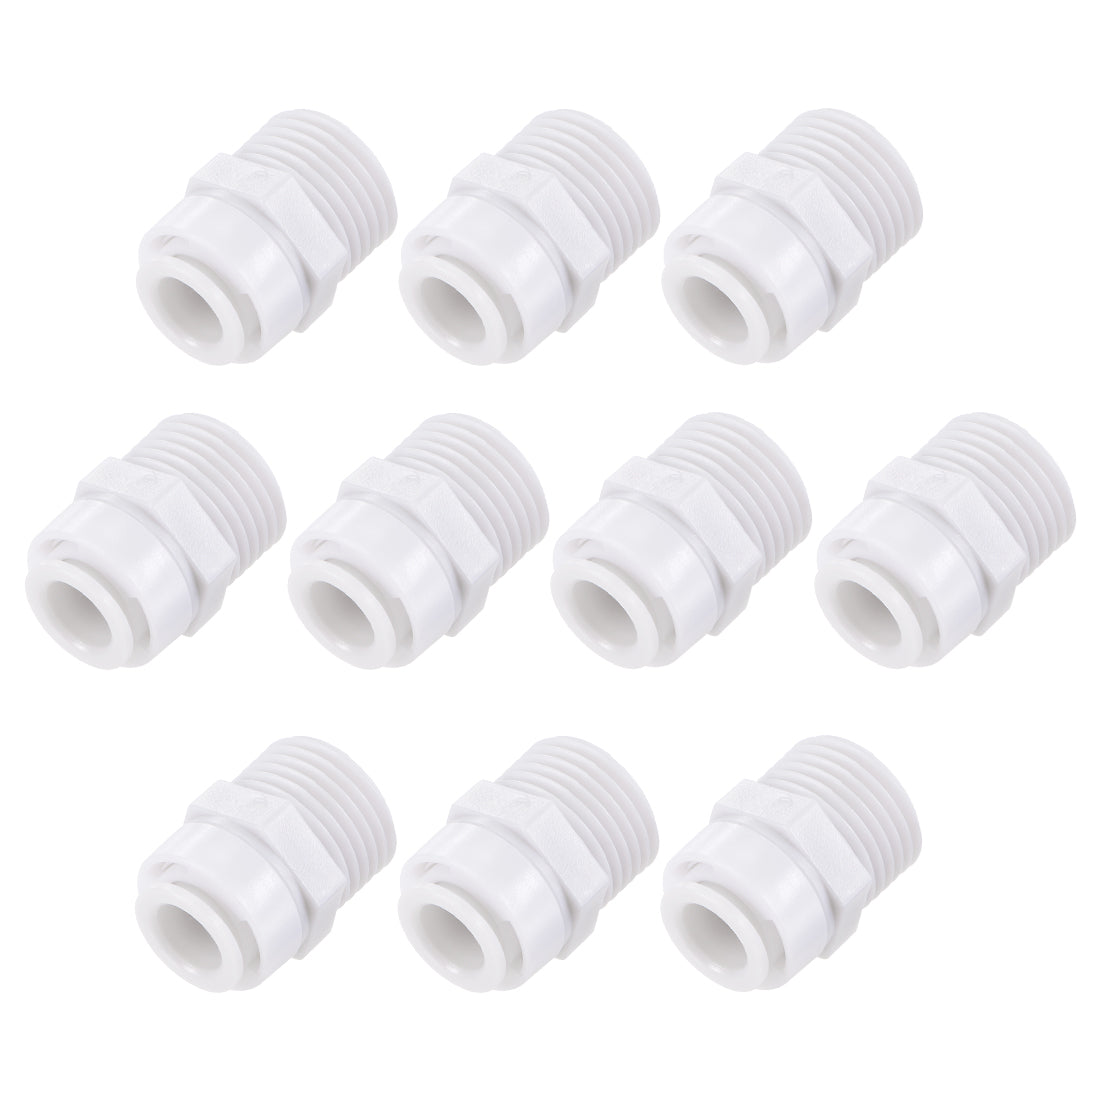 uxcell Uxcell Quick Connector G1/2 Male Thread to 3/8" Tube, Straight Connect Fittings for Water Purifier, 29mm Gray White 10Pcs